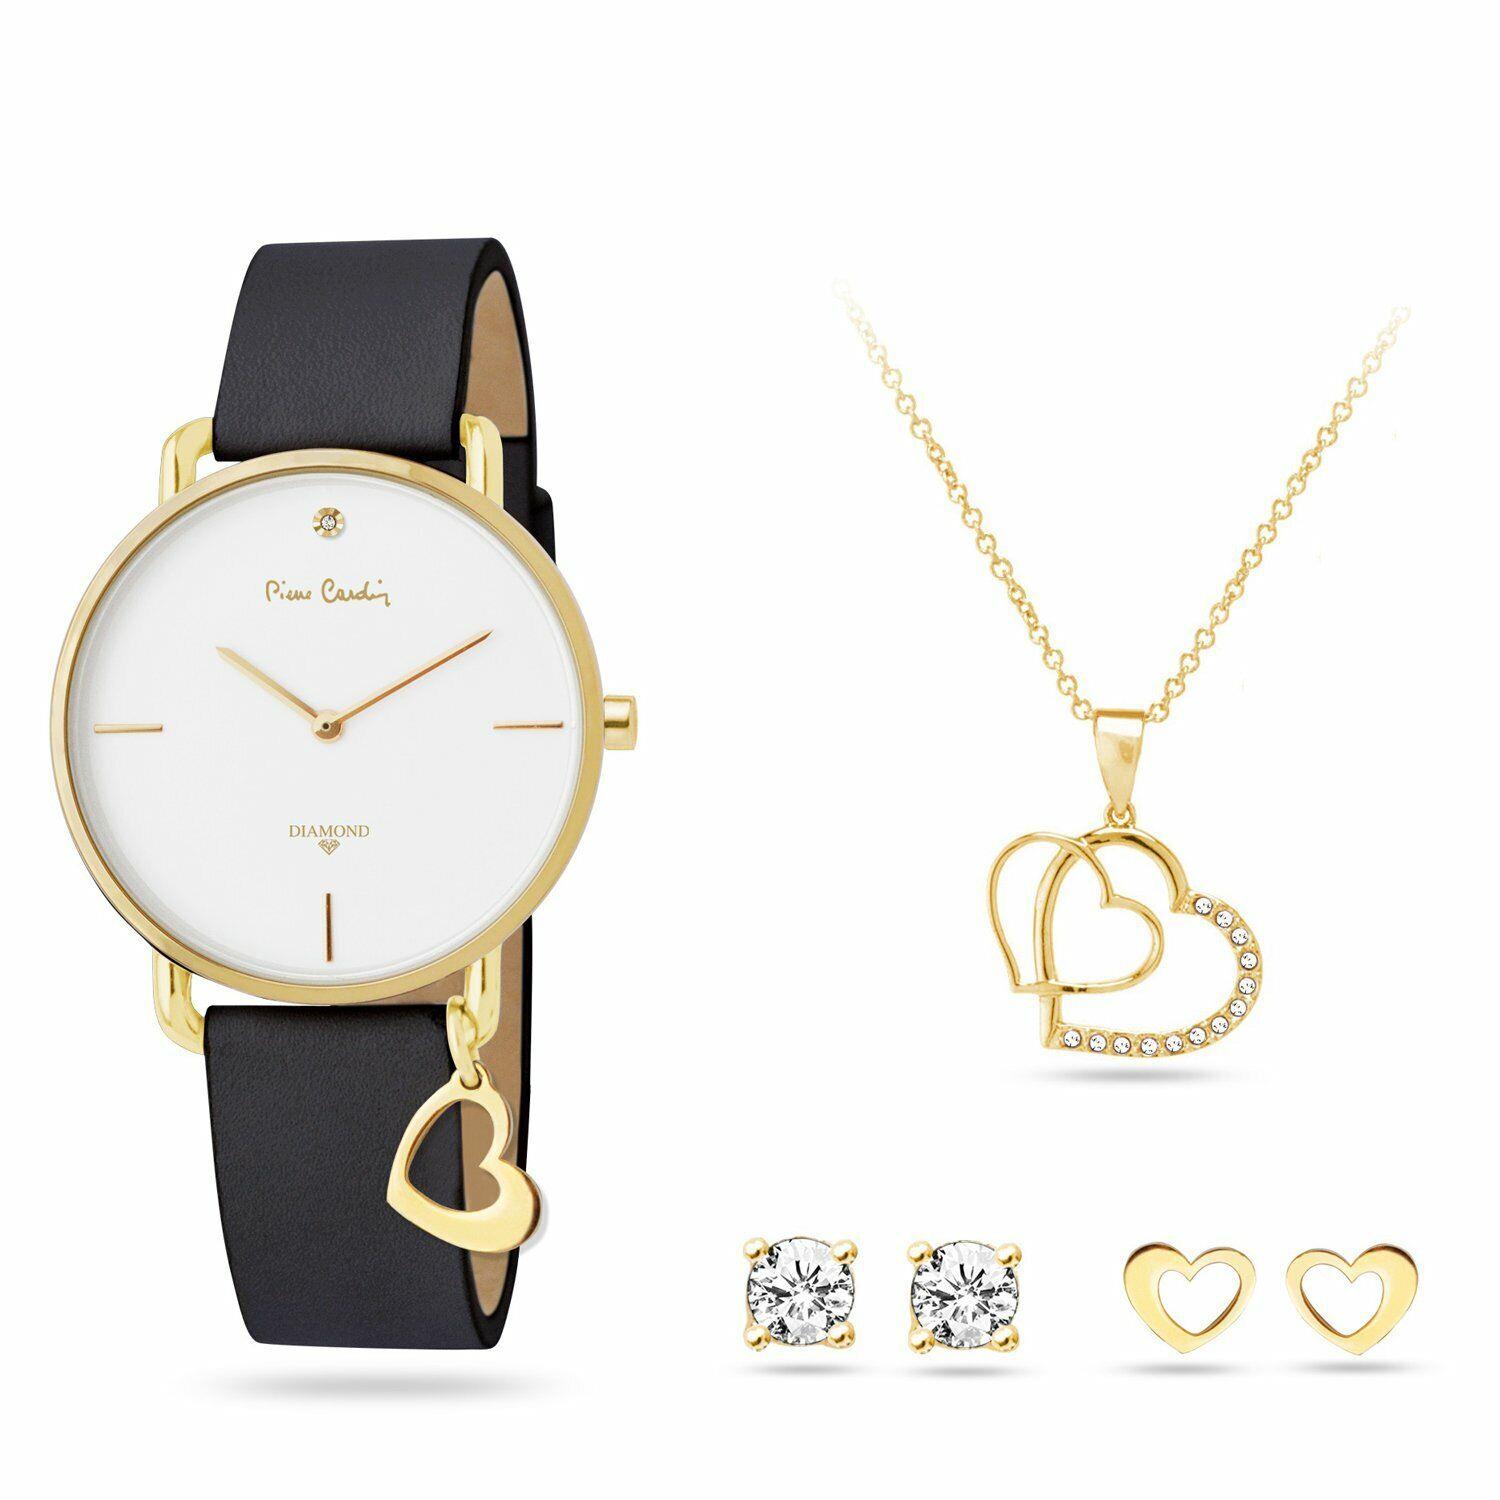 Pierre Cardin Gold Watch with Earrings and Necklace Set